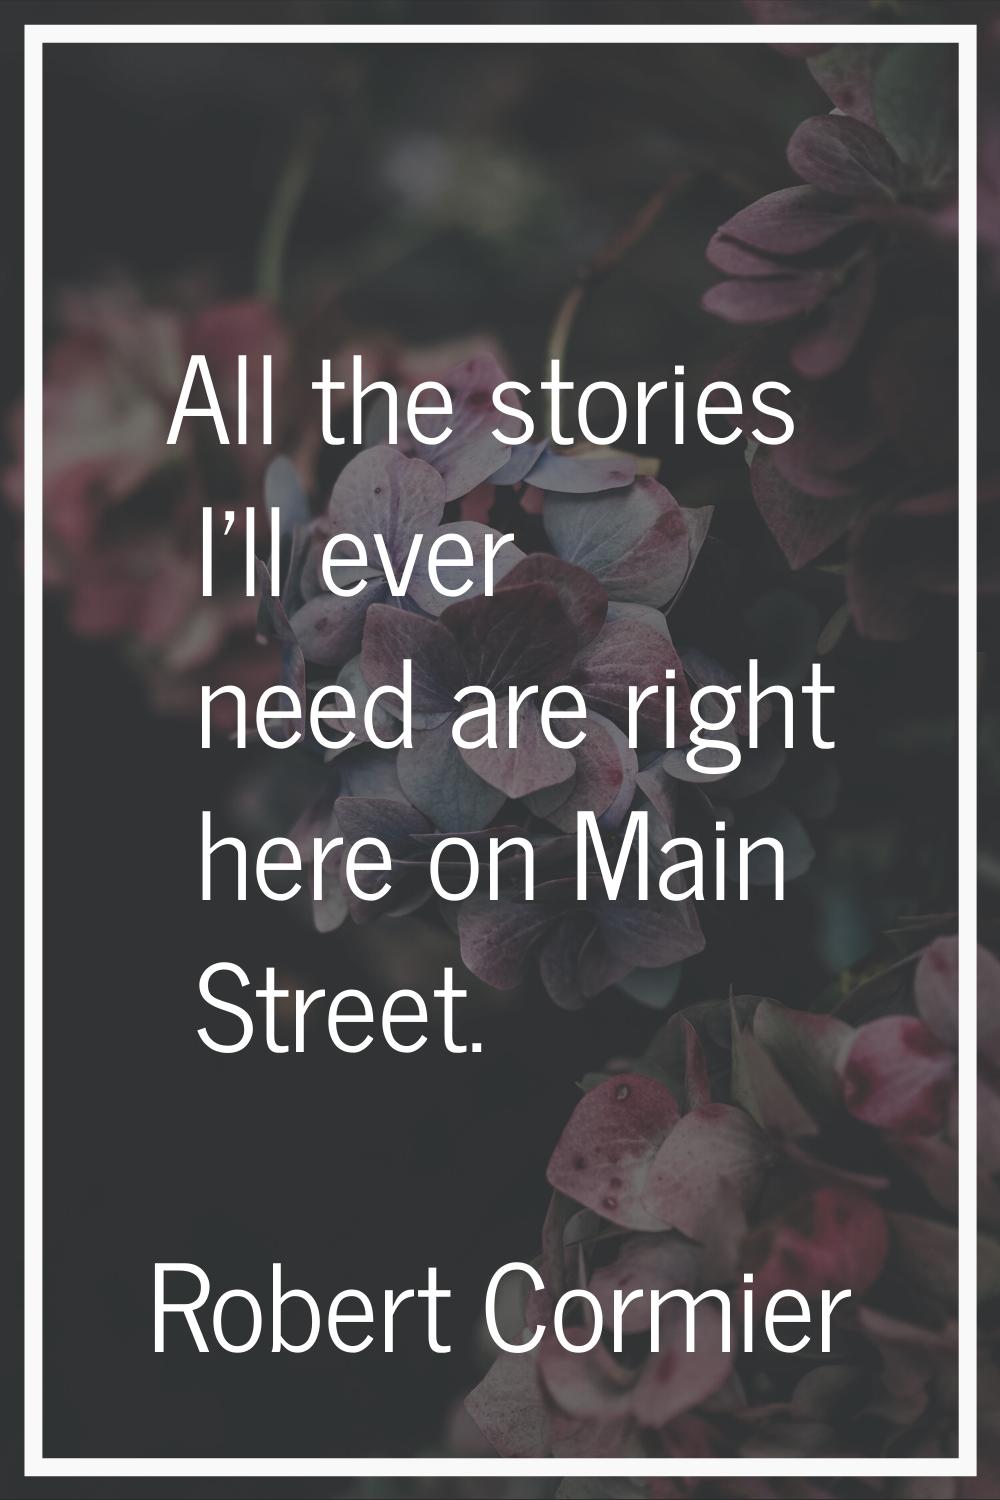 All the stories I'll ever need are right here on Main Street.